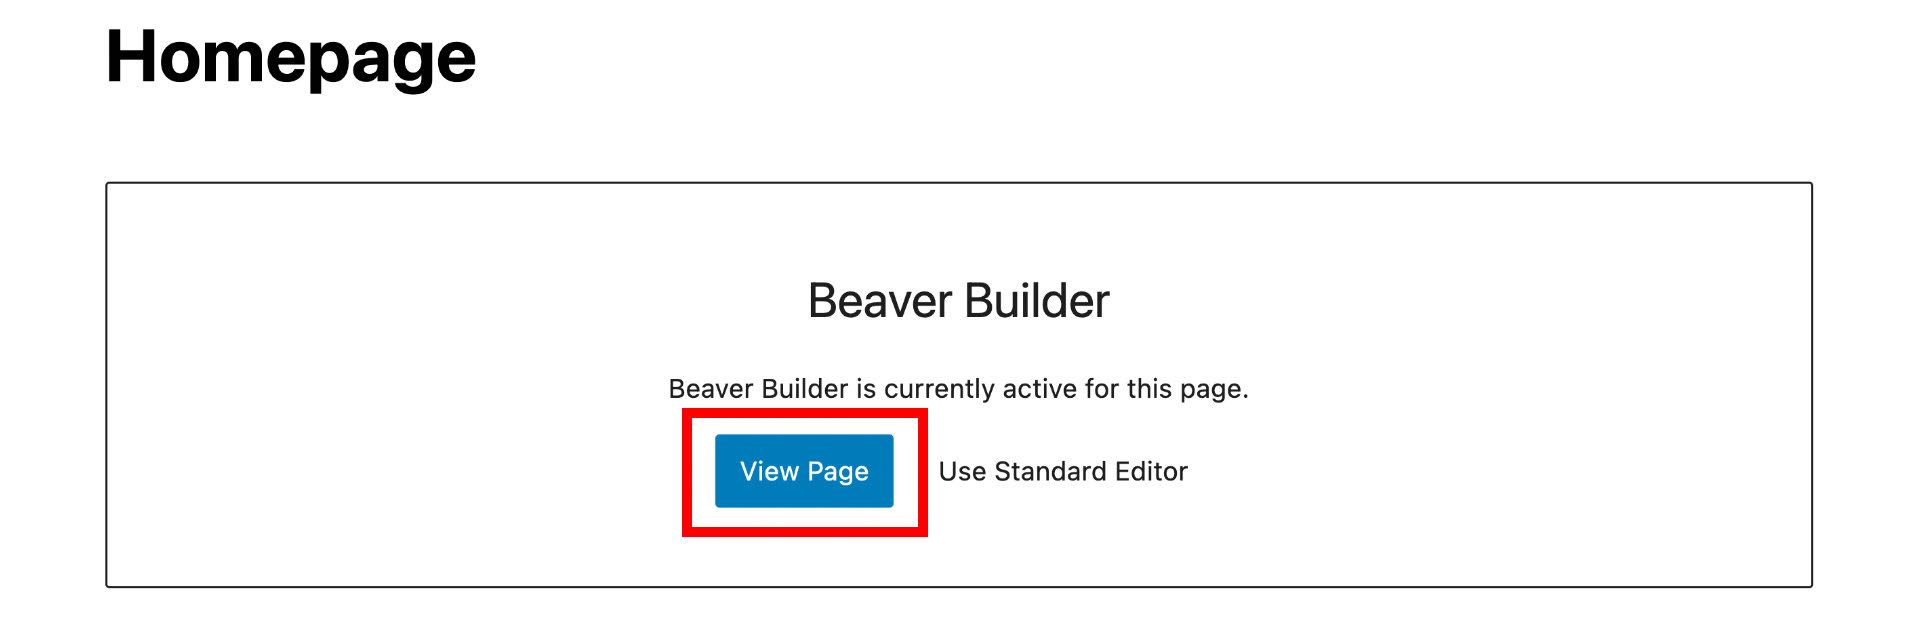 Restricted to viewing Beaver Builder pages